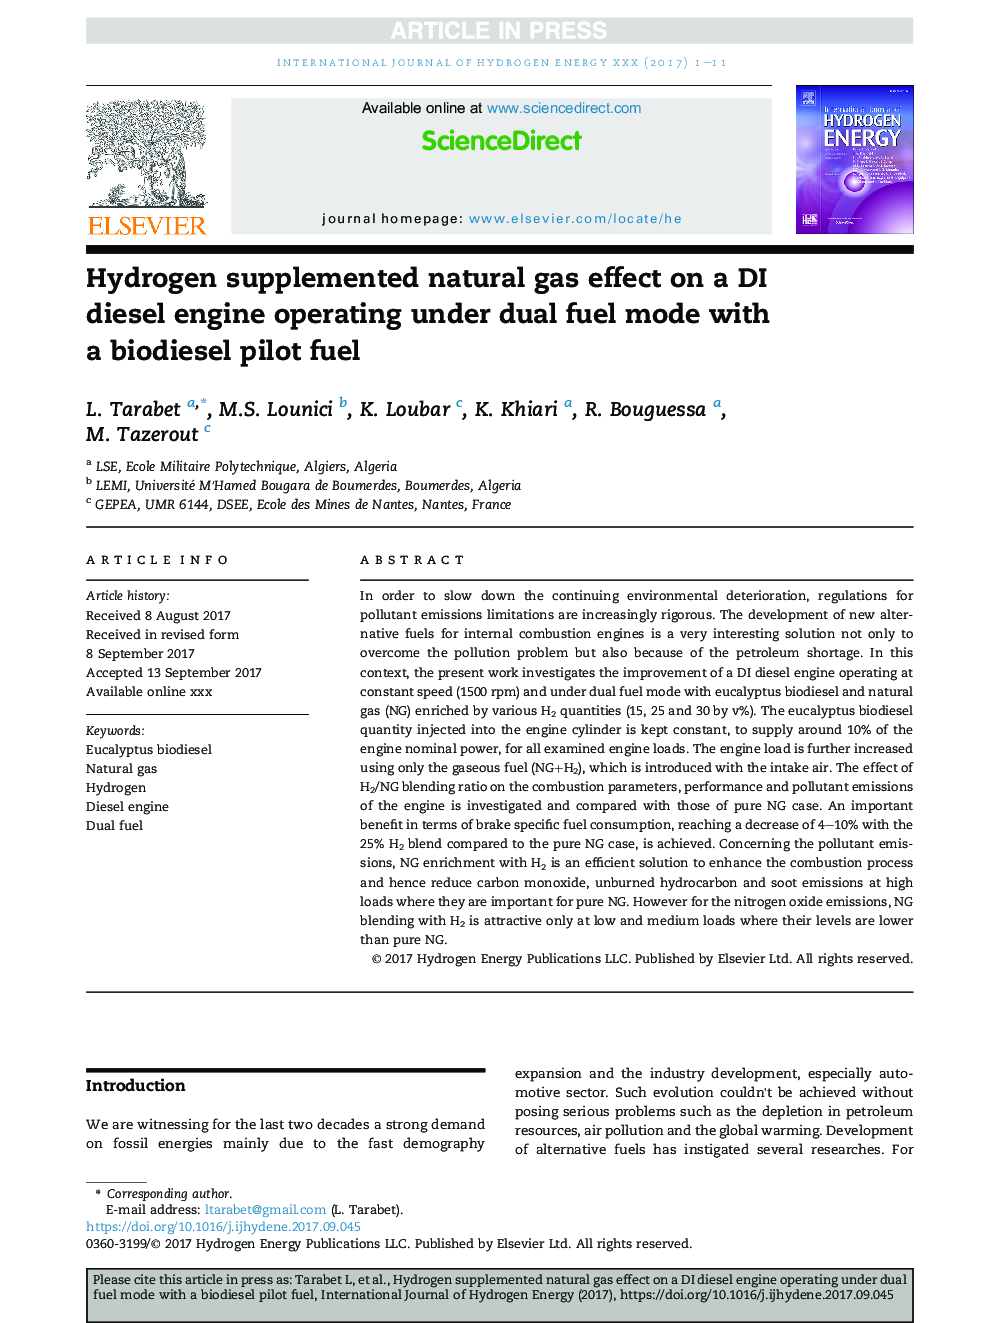 Hydrogen supplemented natural gas effect on a DI diesel engine operating under dual fuel mode with a biodiesel pilot fuel